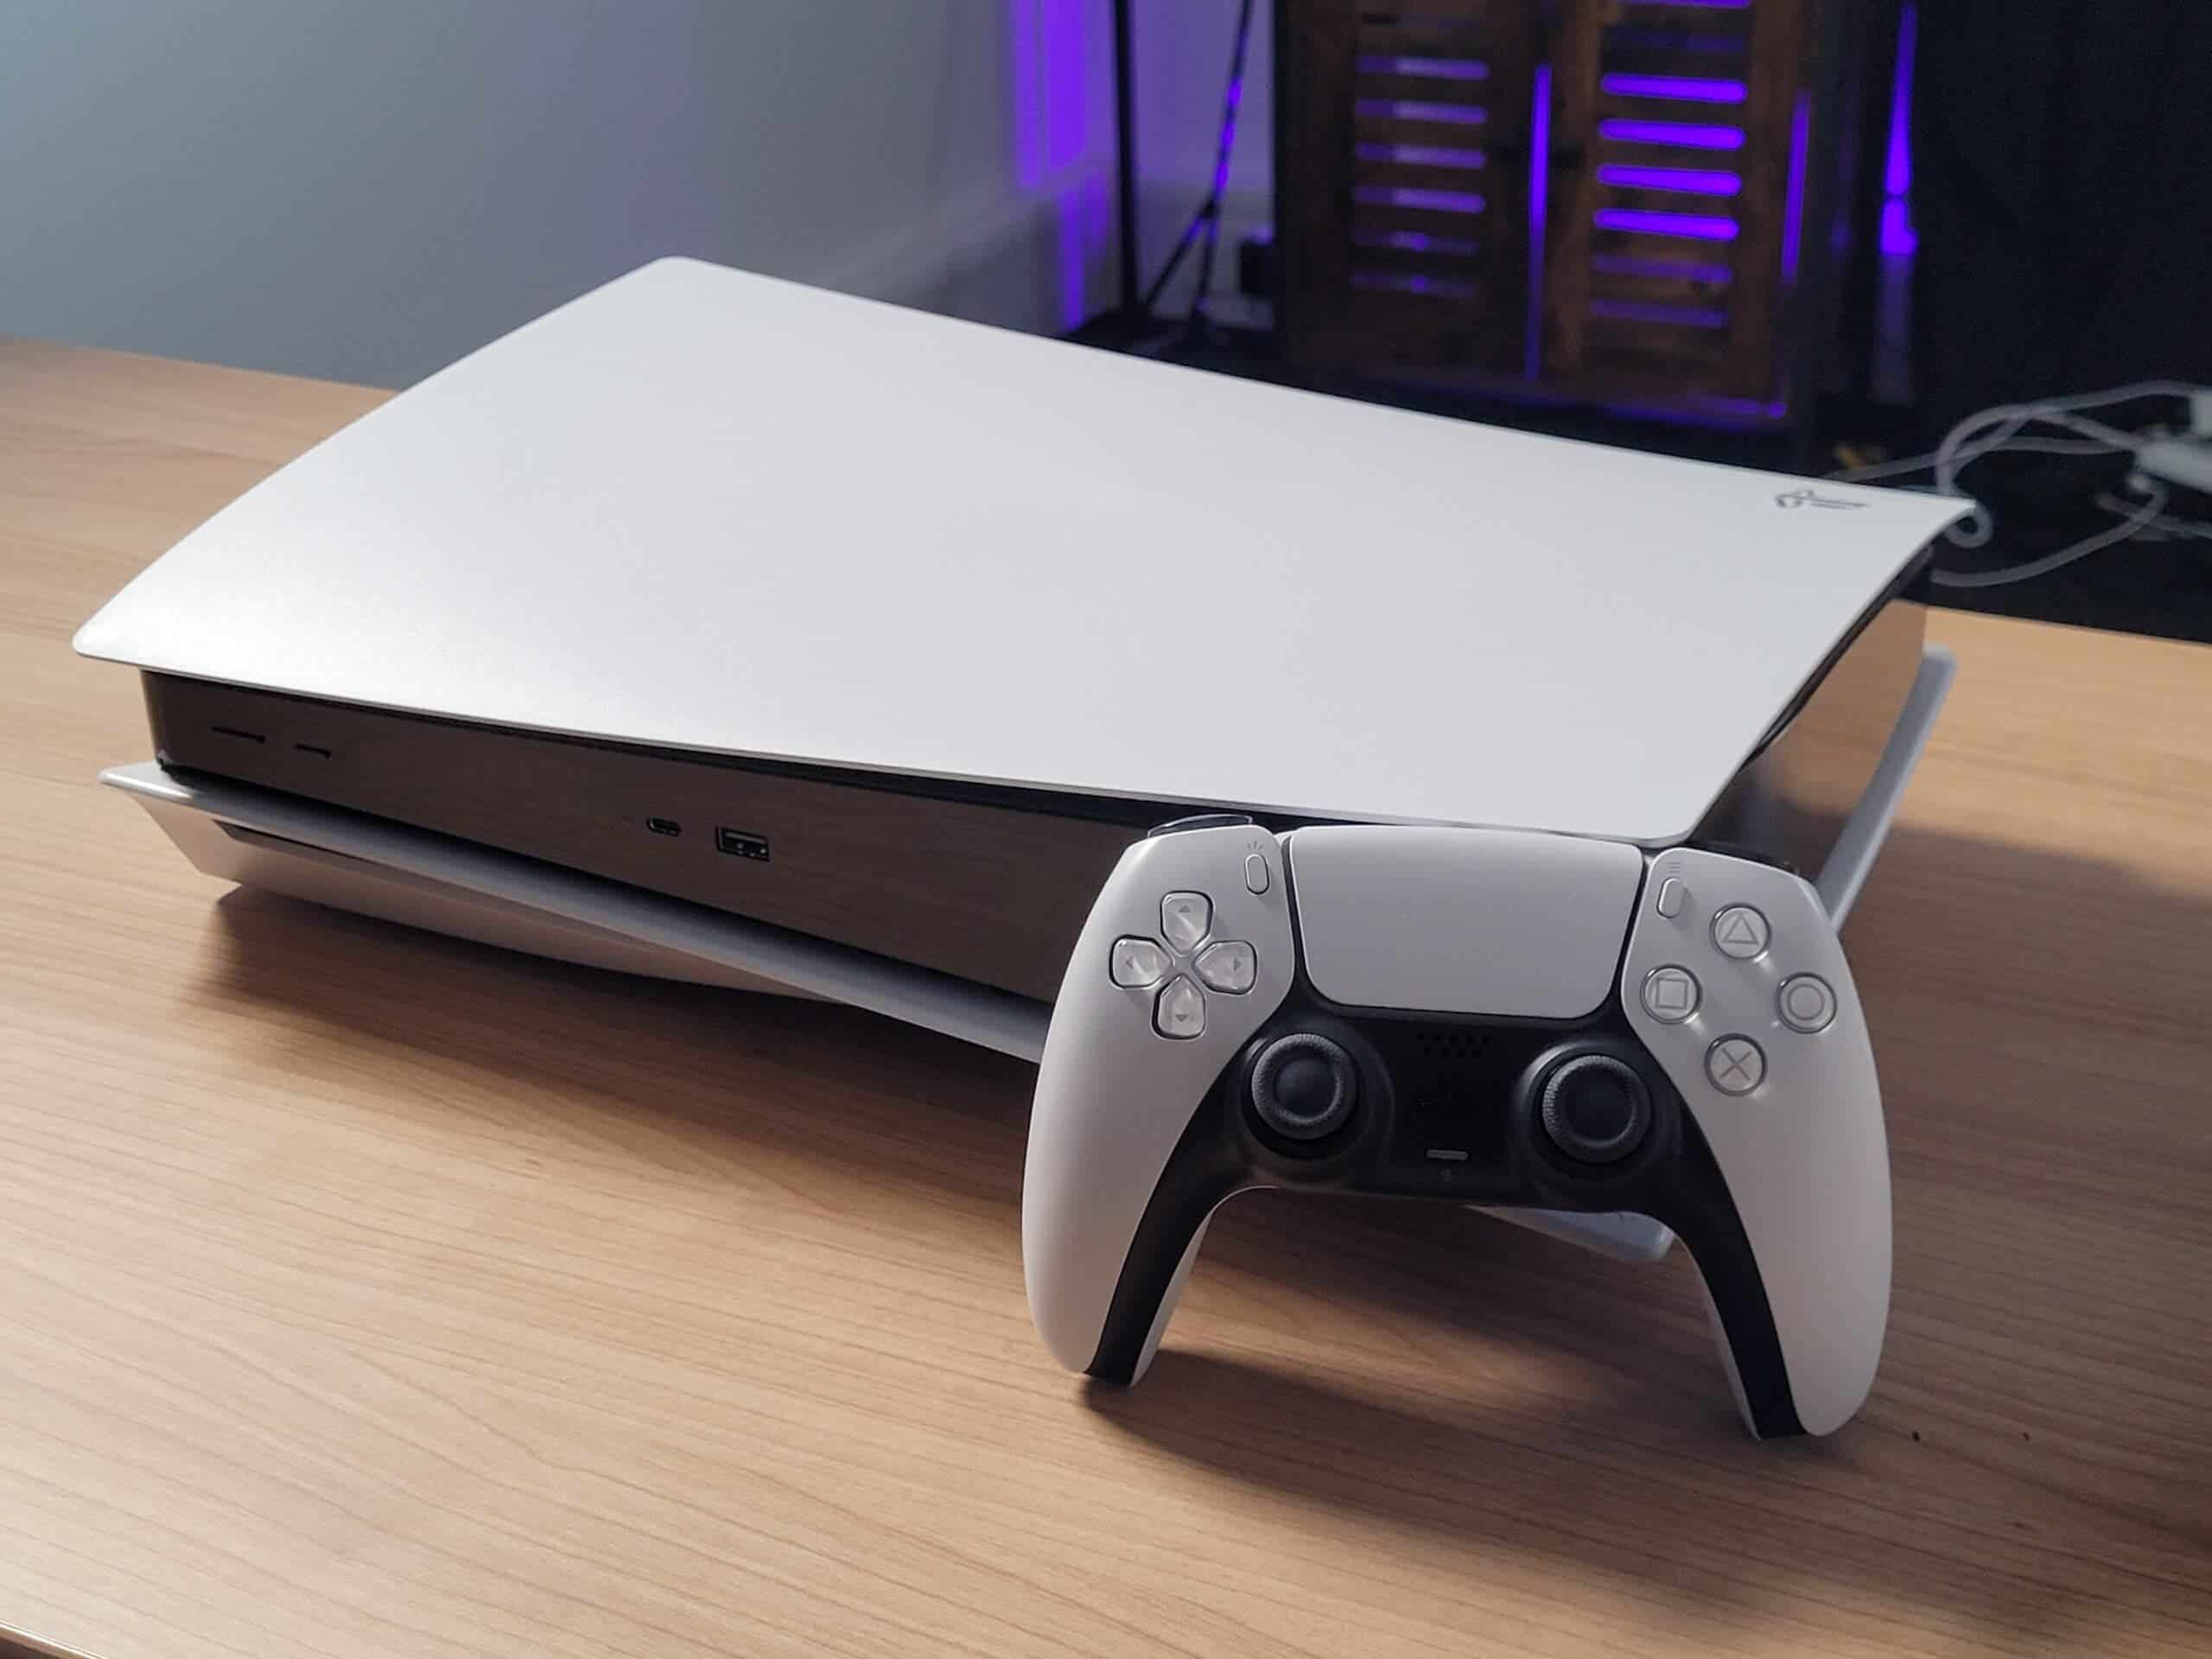 Roberto Serrano' 🇵🇸🇮🇱🇺🇦☮️🙏🏻  📊🎮🍿 on X: New PlayStation 5  Console - Chassis D Model CFI-1316A - Almost identical to the Ps5 but  feature a detachable disc drive - Not confirmed reveal